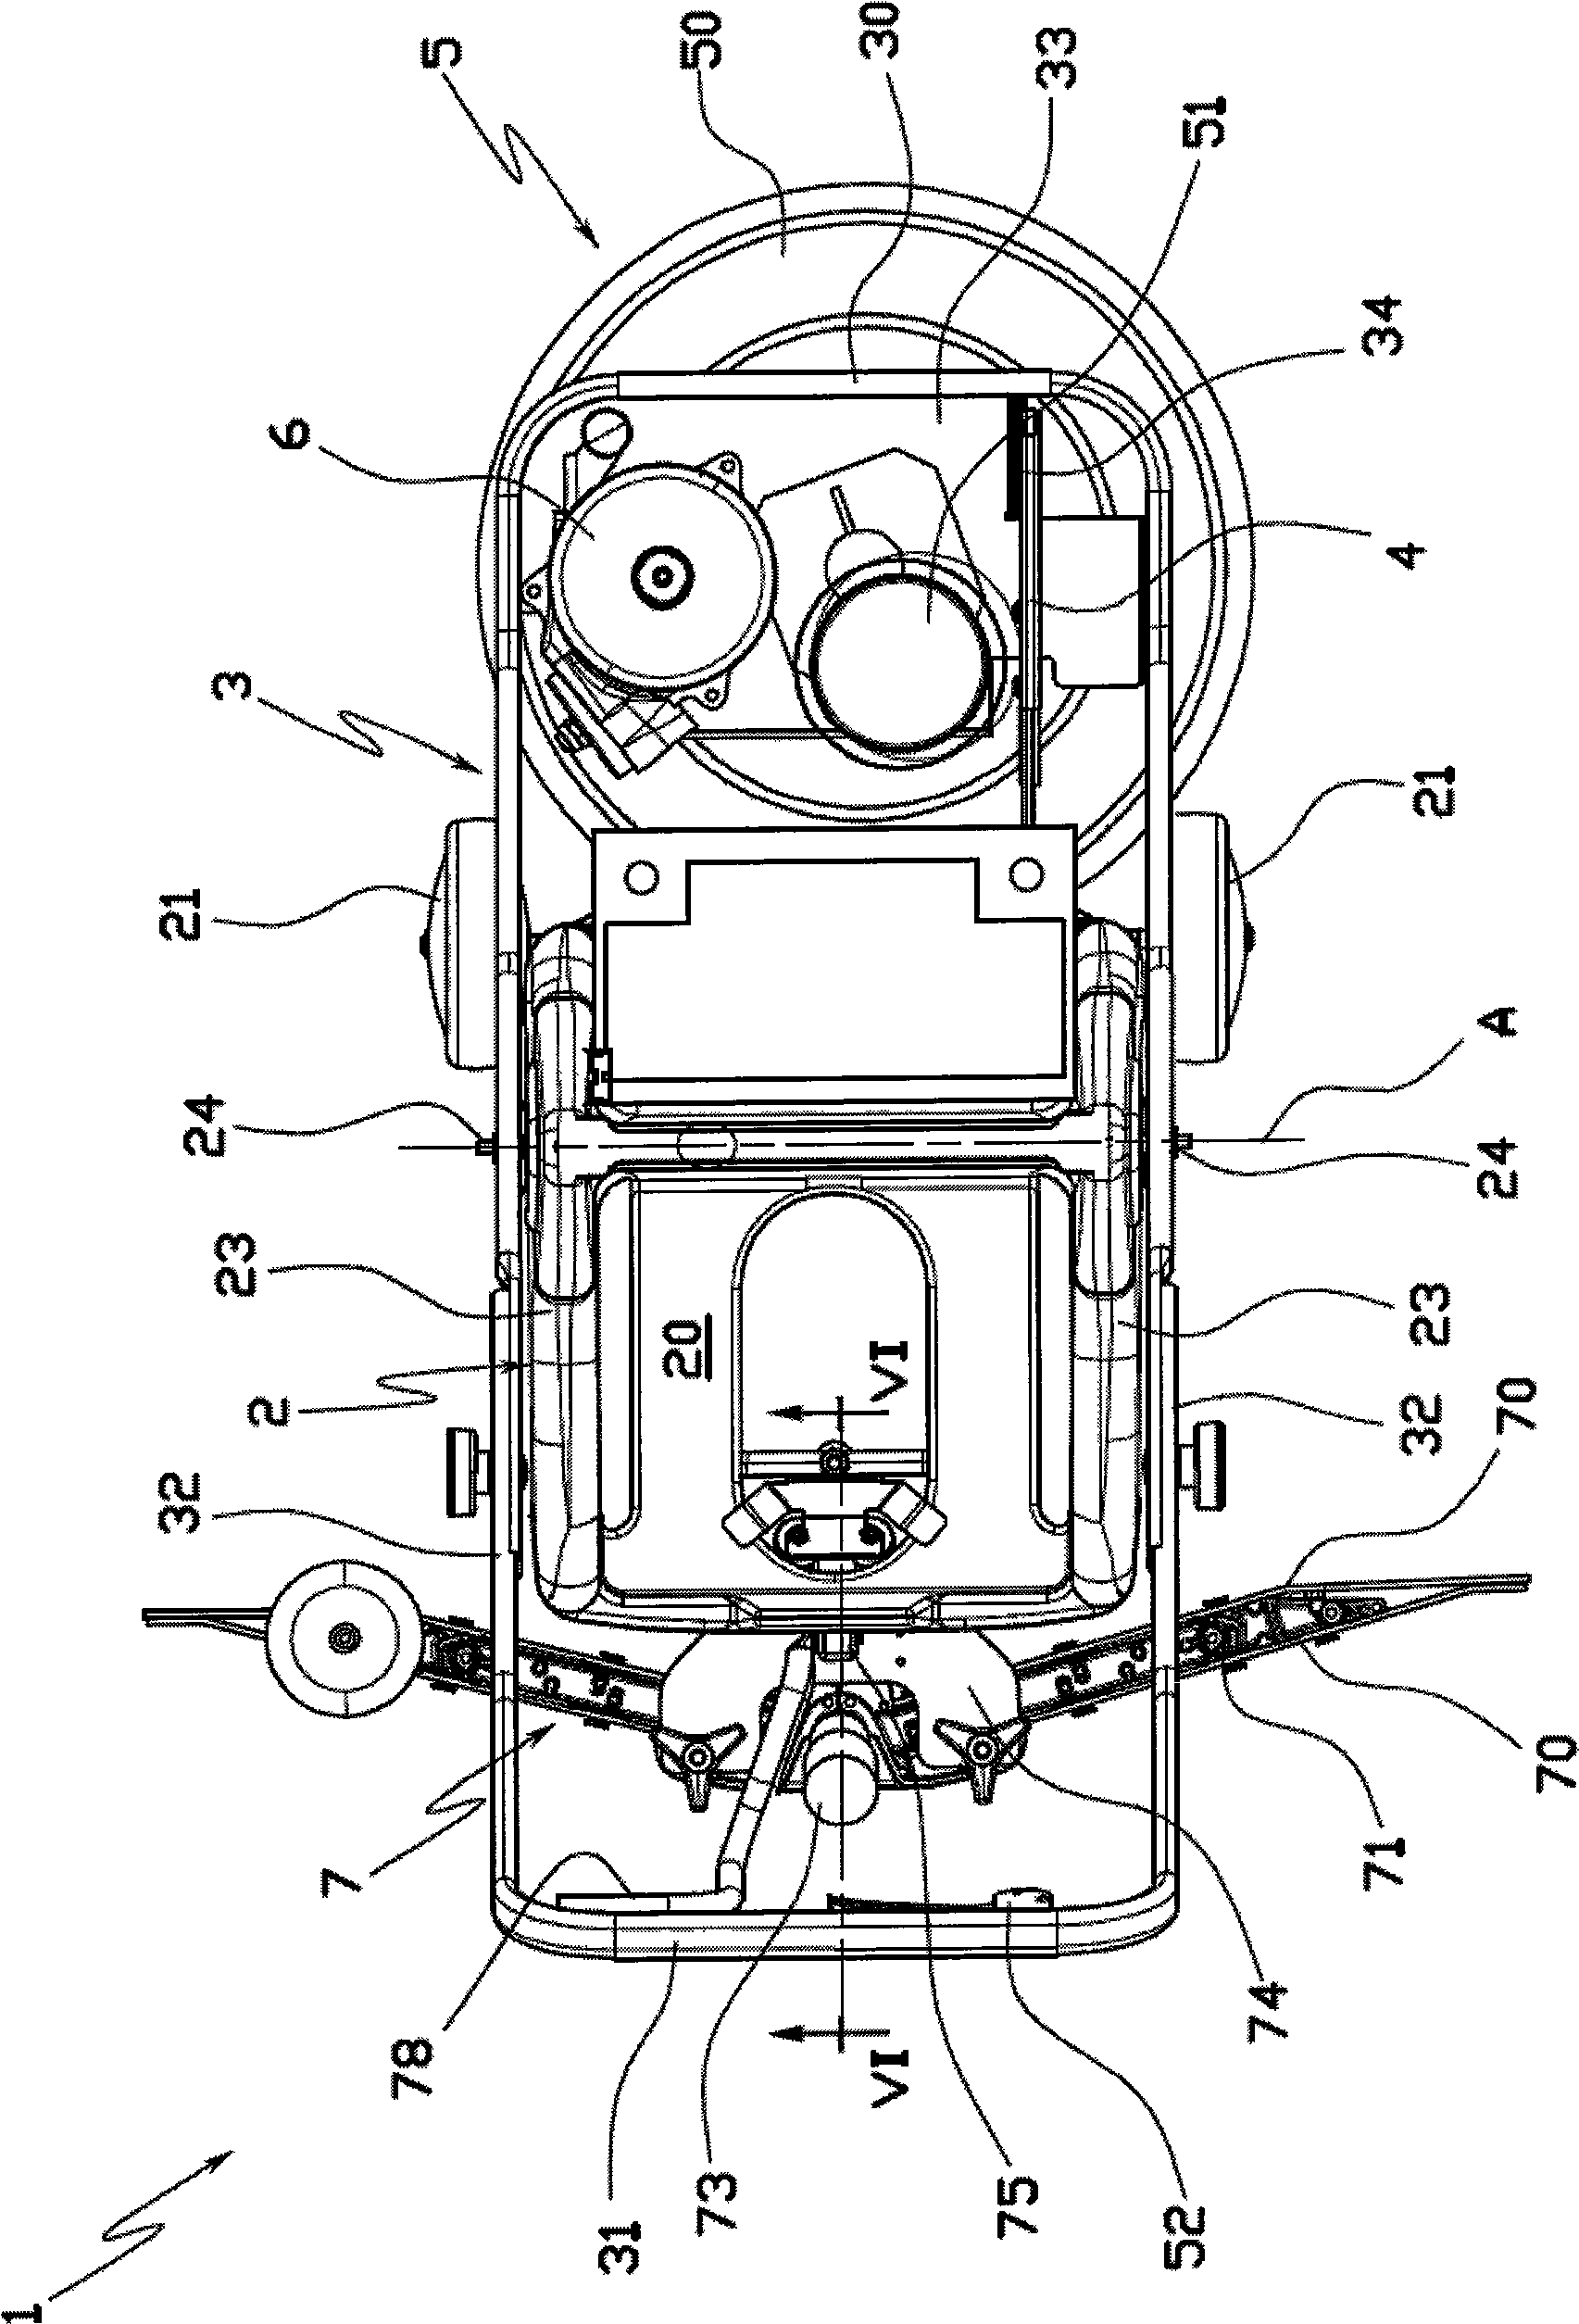 A floor-cleaning machine